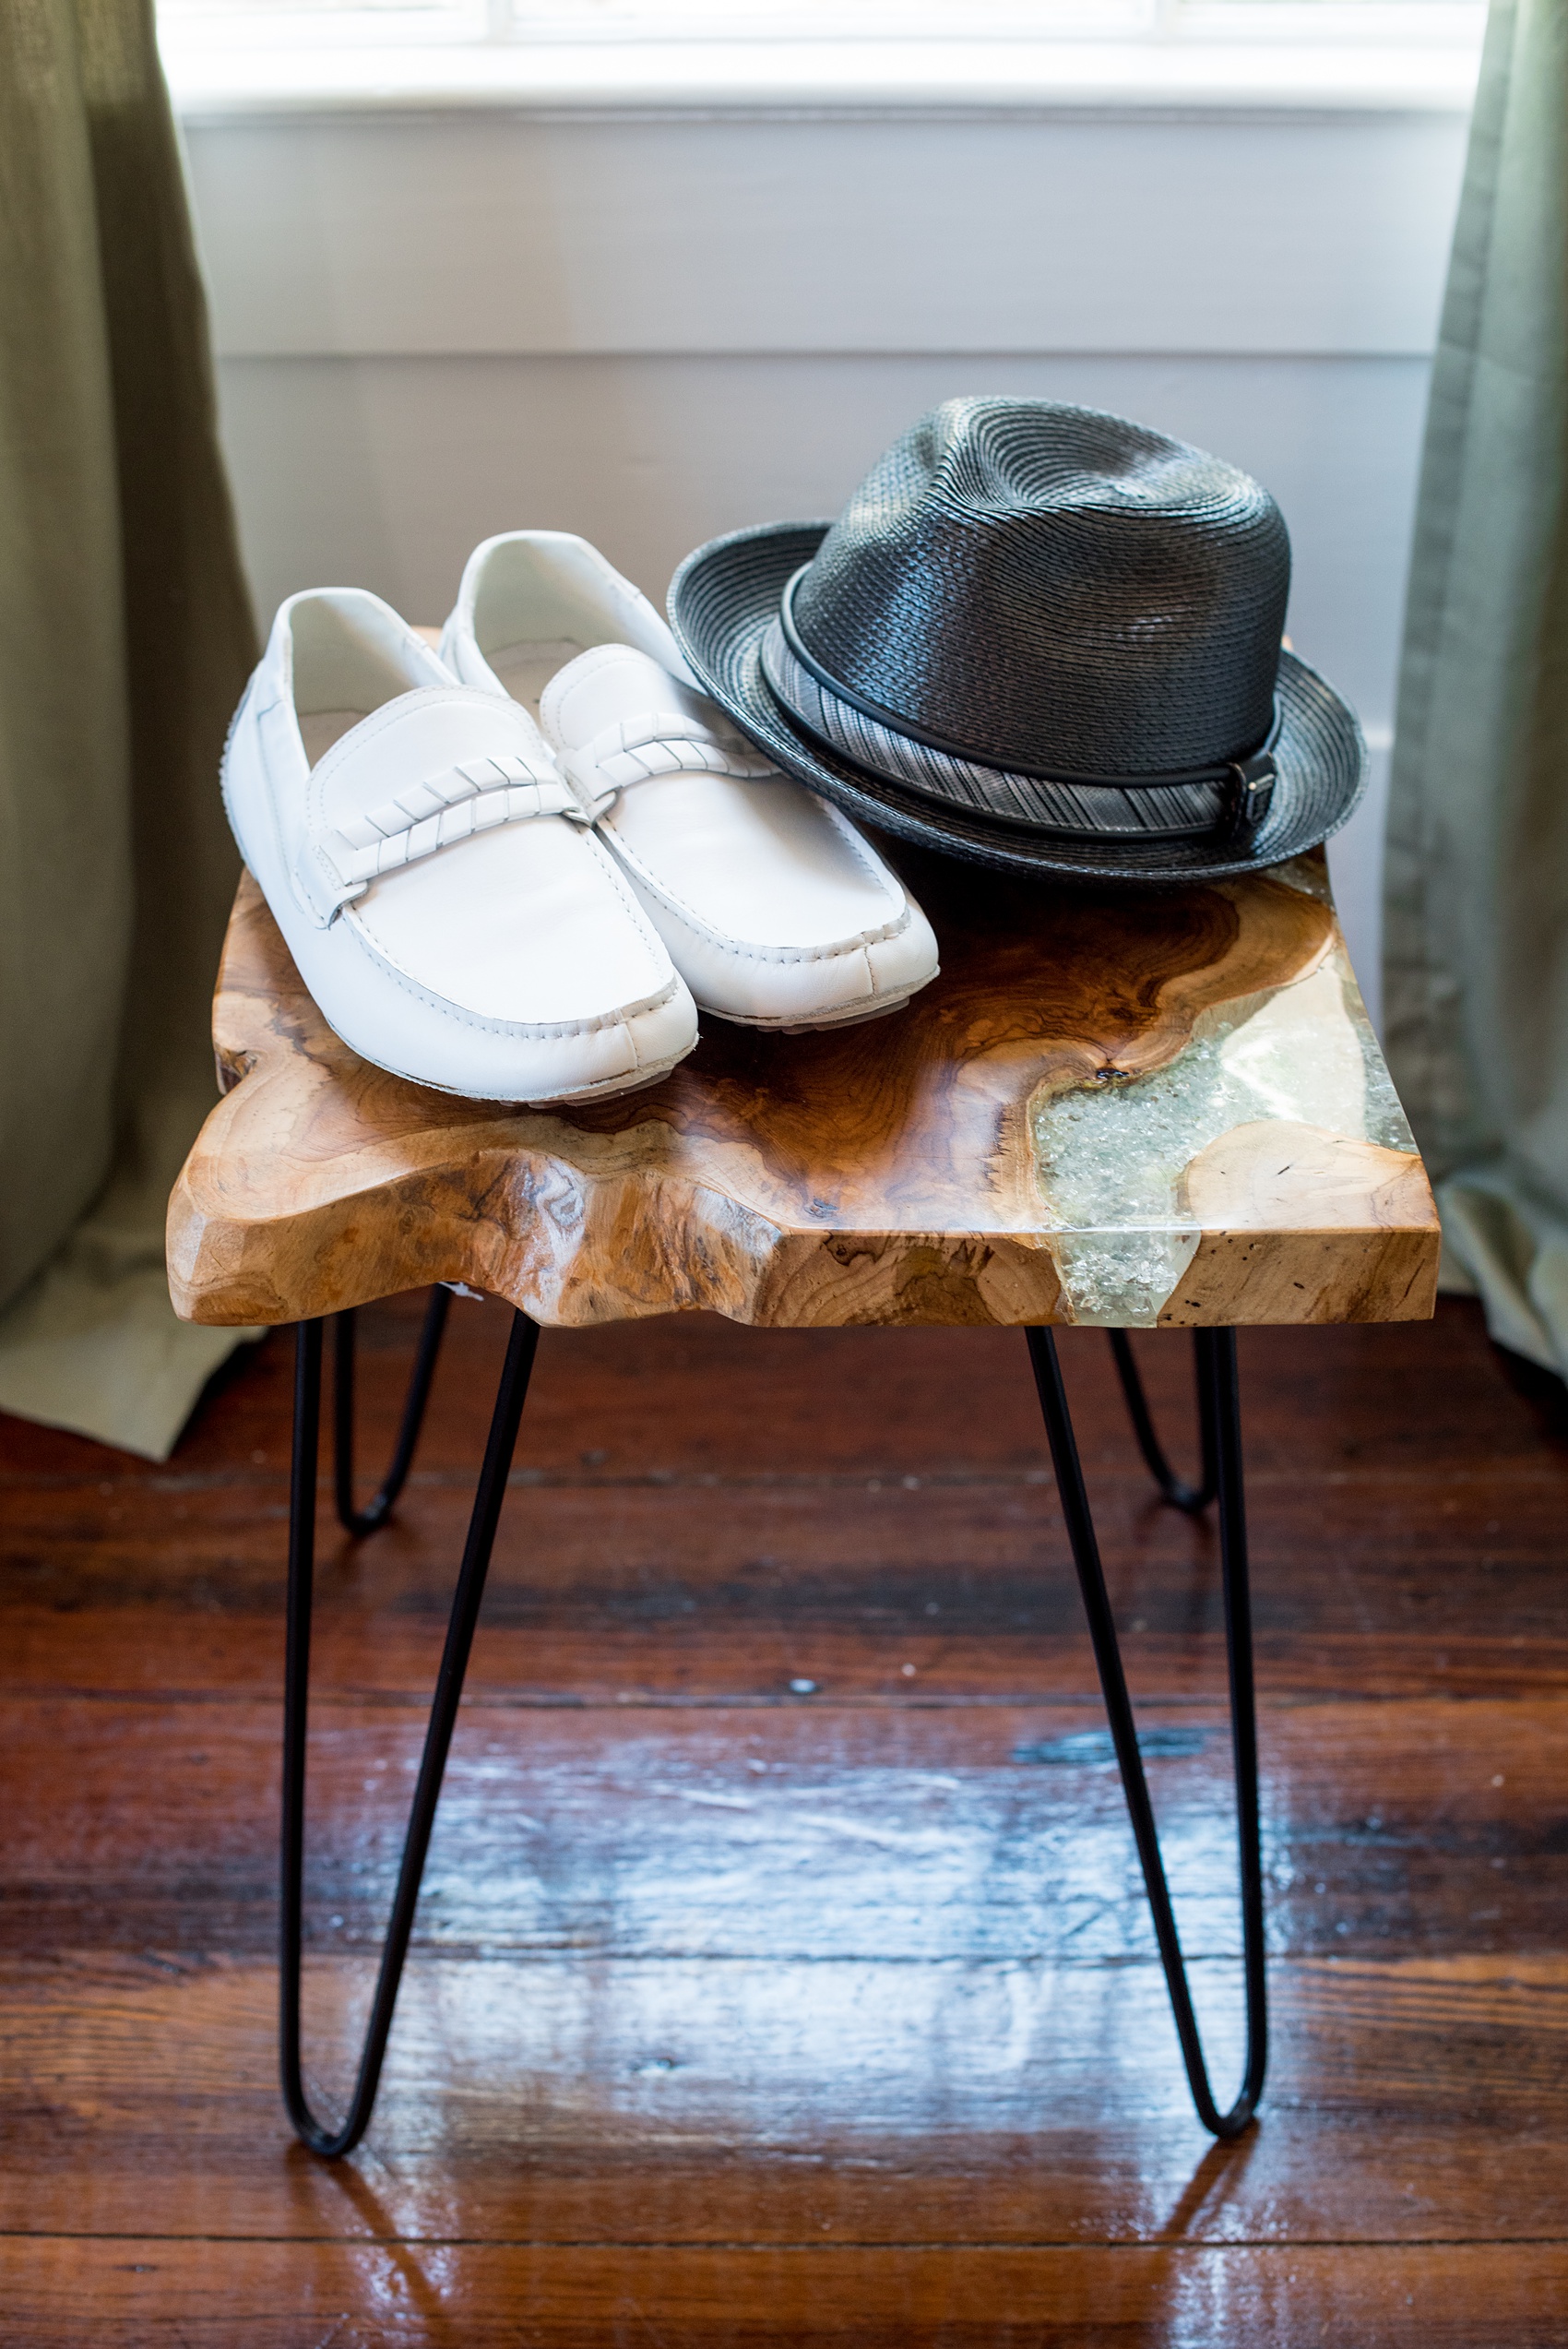 Mikkel Paige Photography pictures of a wedding at Leslie-Alford Mim's House in North Carolina for a Mad Dash Weddings event. Photo of the groom's white loafers and black fedora hat on a wood and gemstone side table.